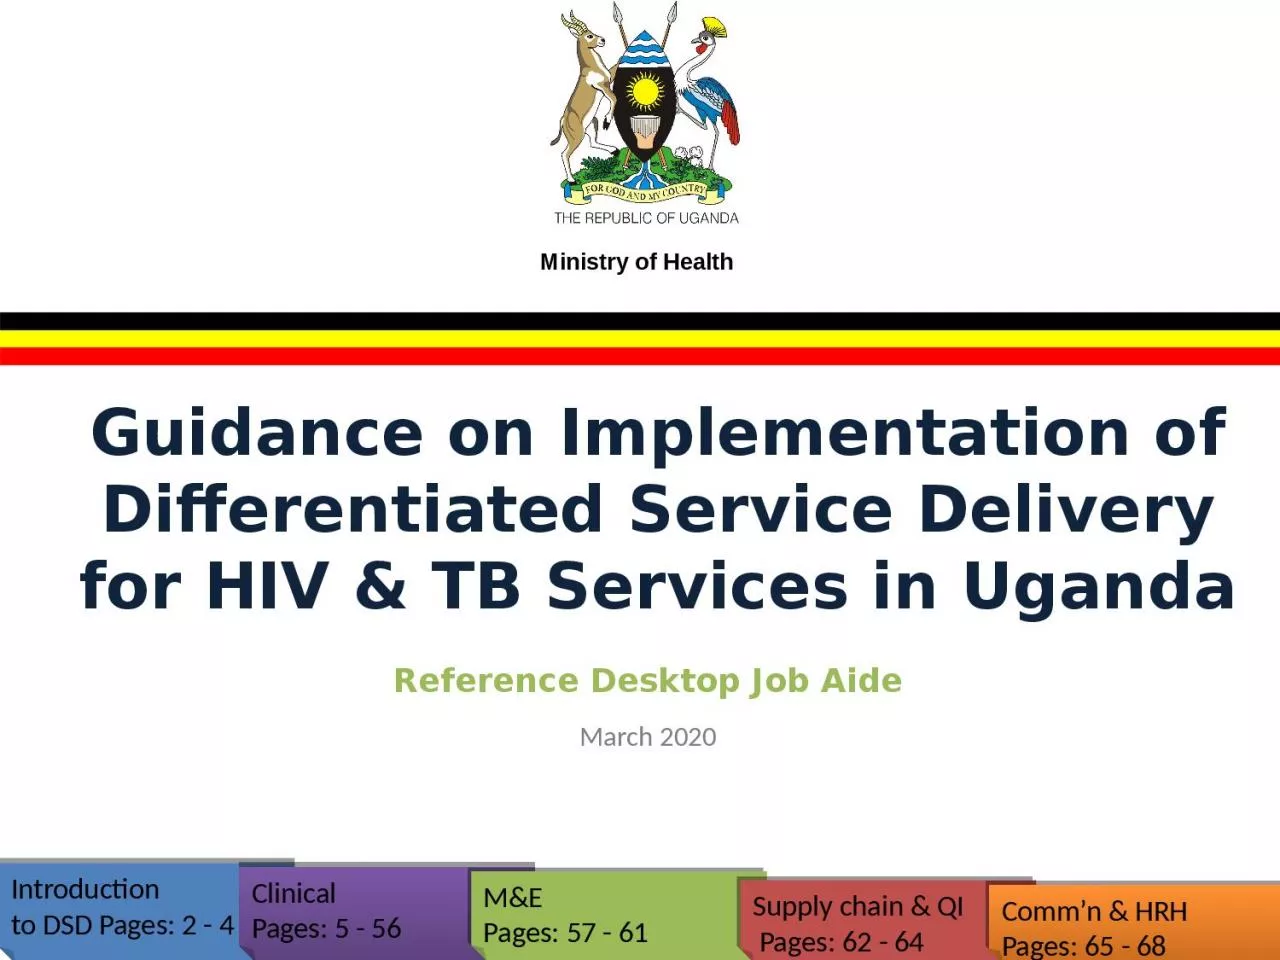 Guidance on Implementation of Differentiated Service Delivery for HIV & TB Services